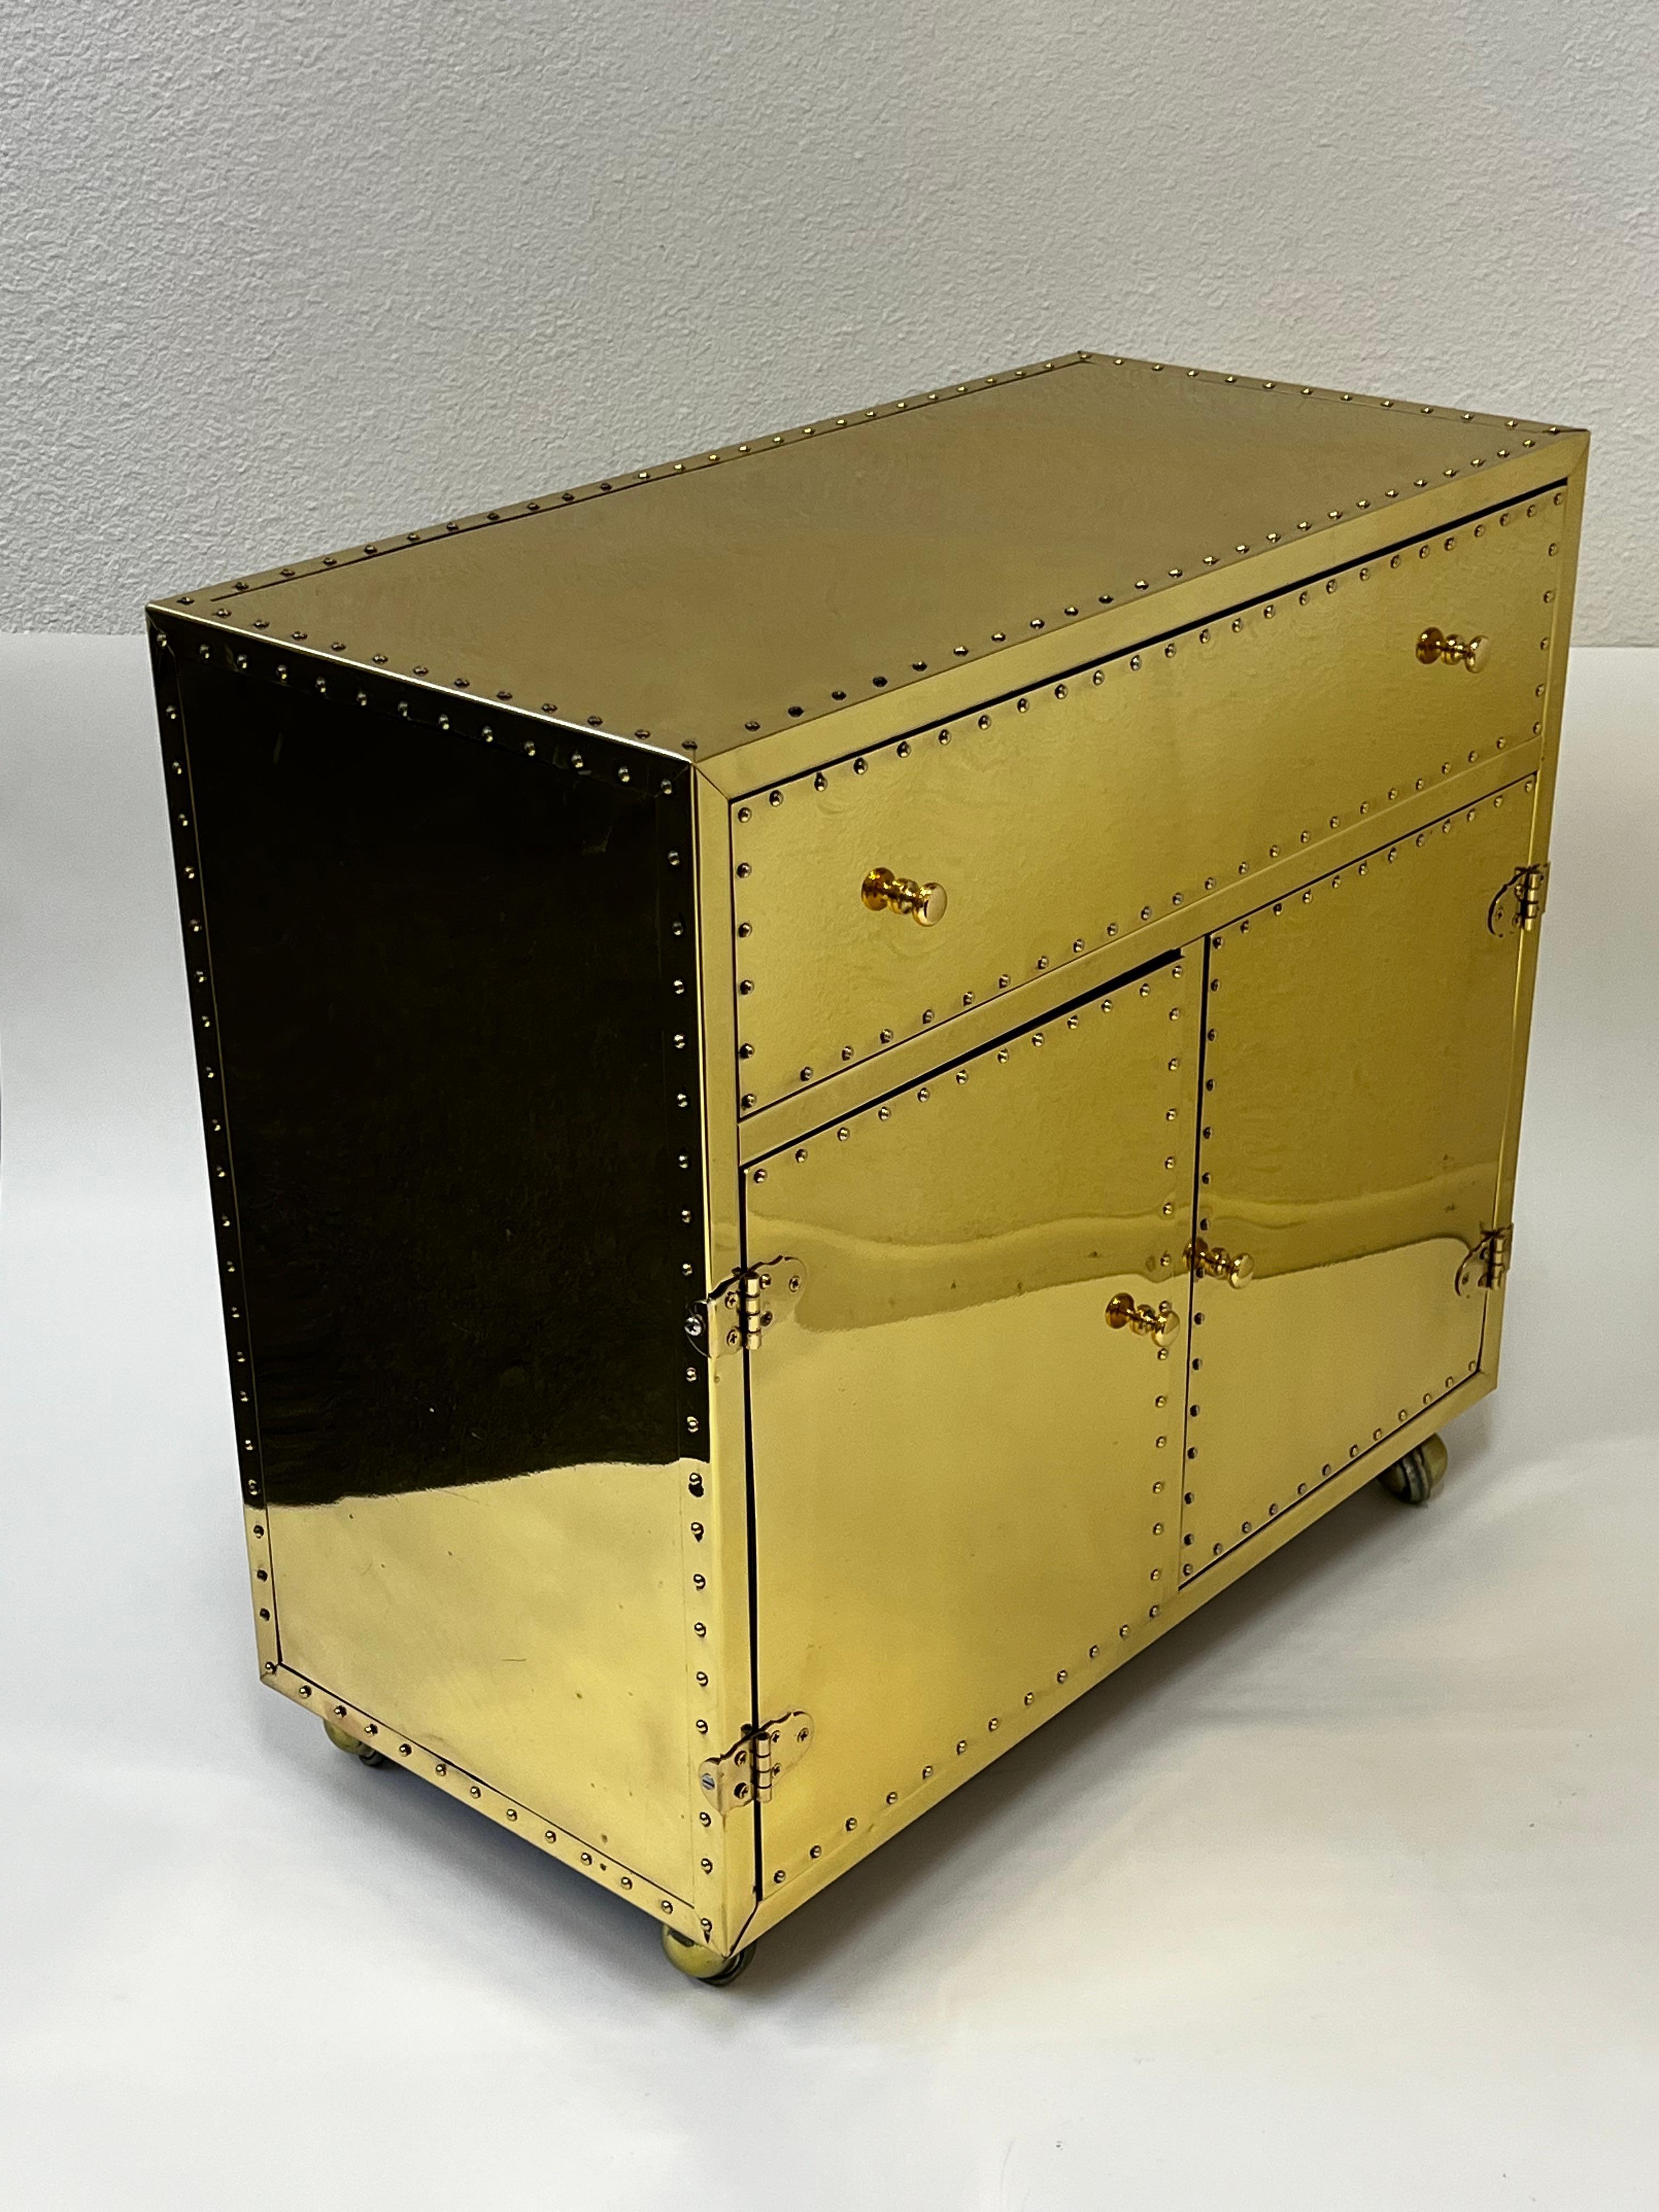 1970’s Spanish  polish brass nightstand or cabinet by Sarreid Ltd. 
Constructed of wood covered with polished brass sheets. 
In original condition shows some wear consistent with age( see detail photos).

Measurements: 26.5” Wide, 13” Deep, 24.75”